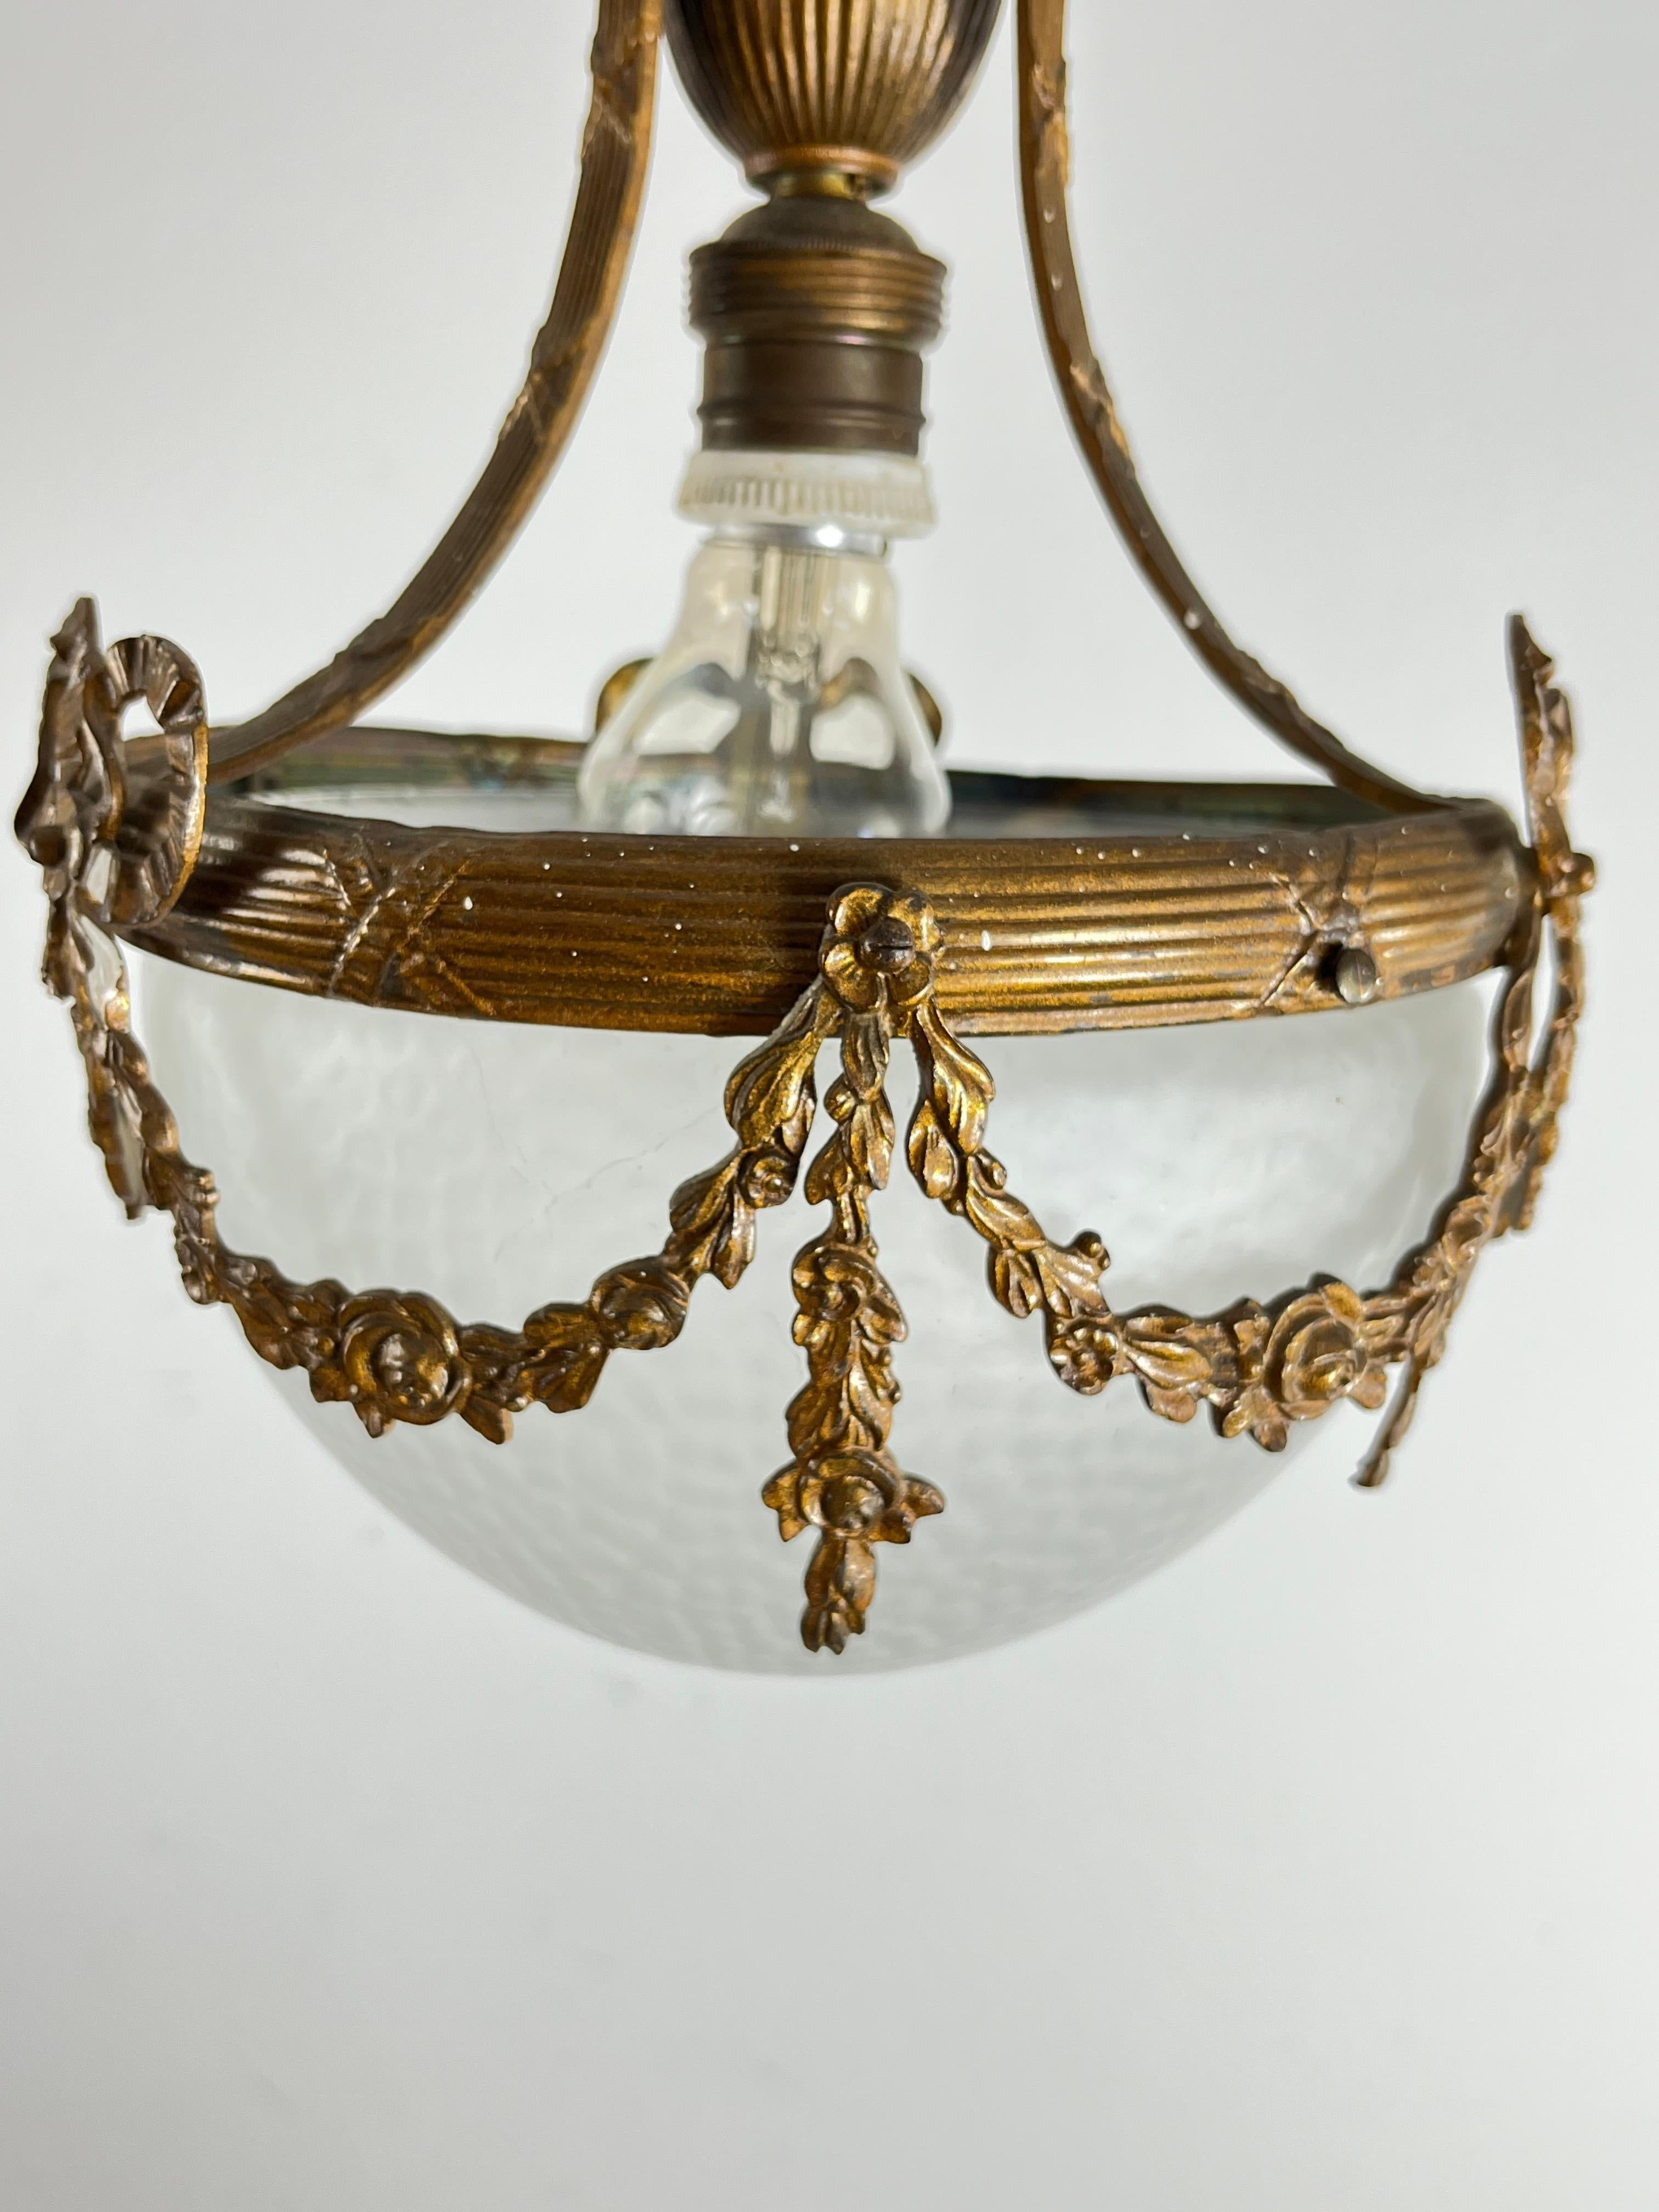 Mid-Century bronze and glass Empire style chandelier, 1950s
Found in a noble apartment.
Intact and functioning. E27 lamp.
Good condition, small signs of aging.